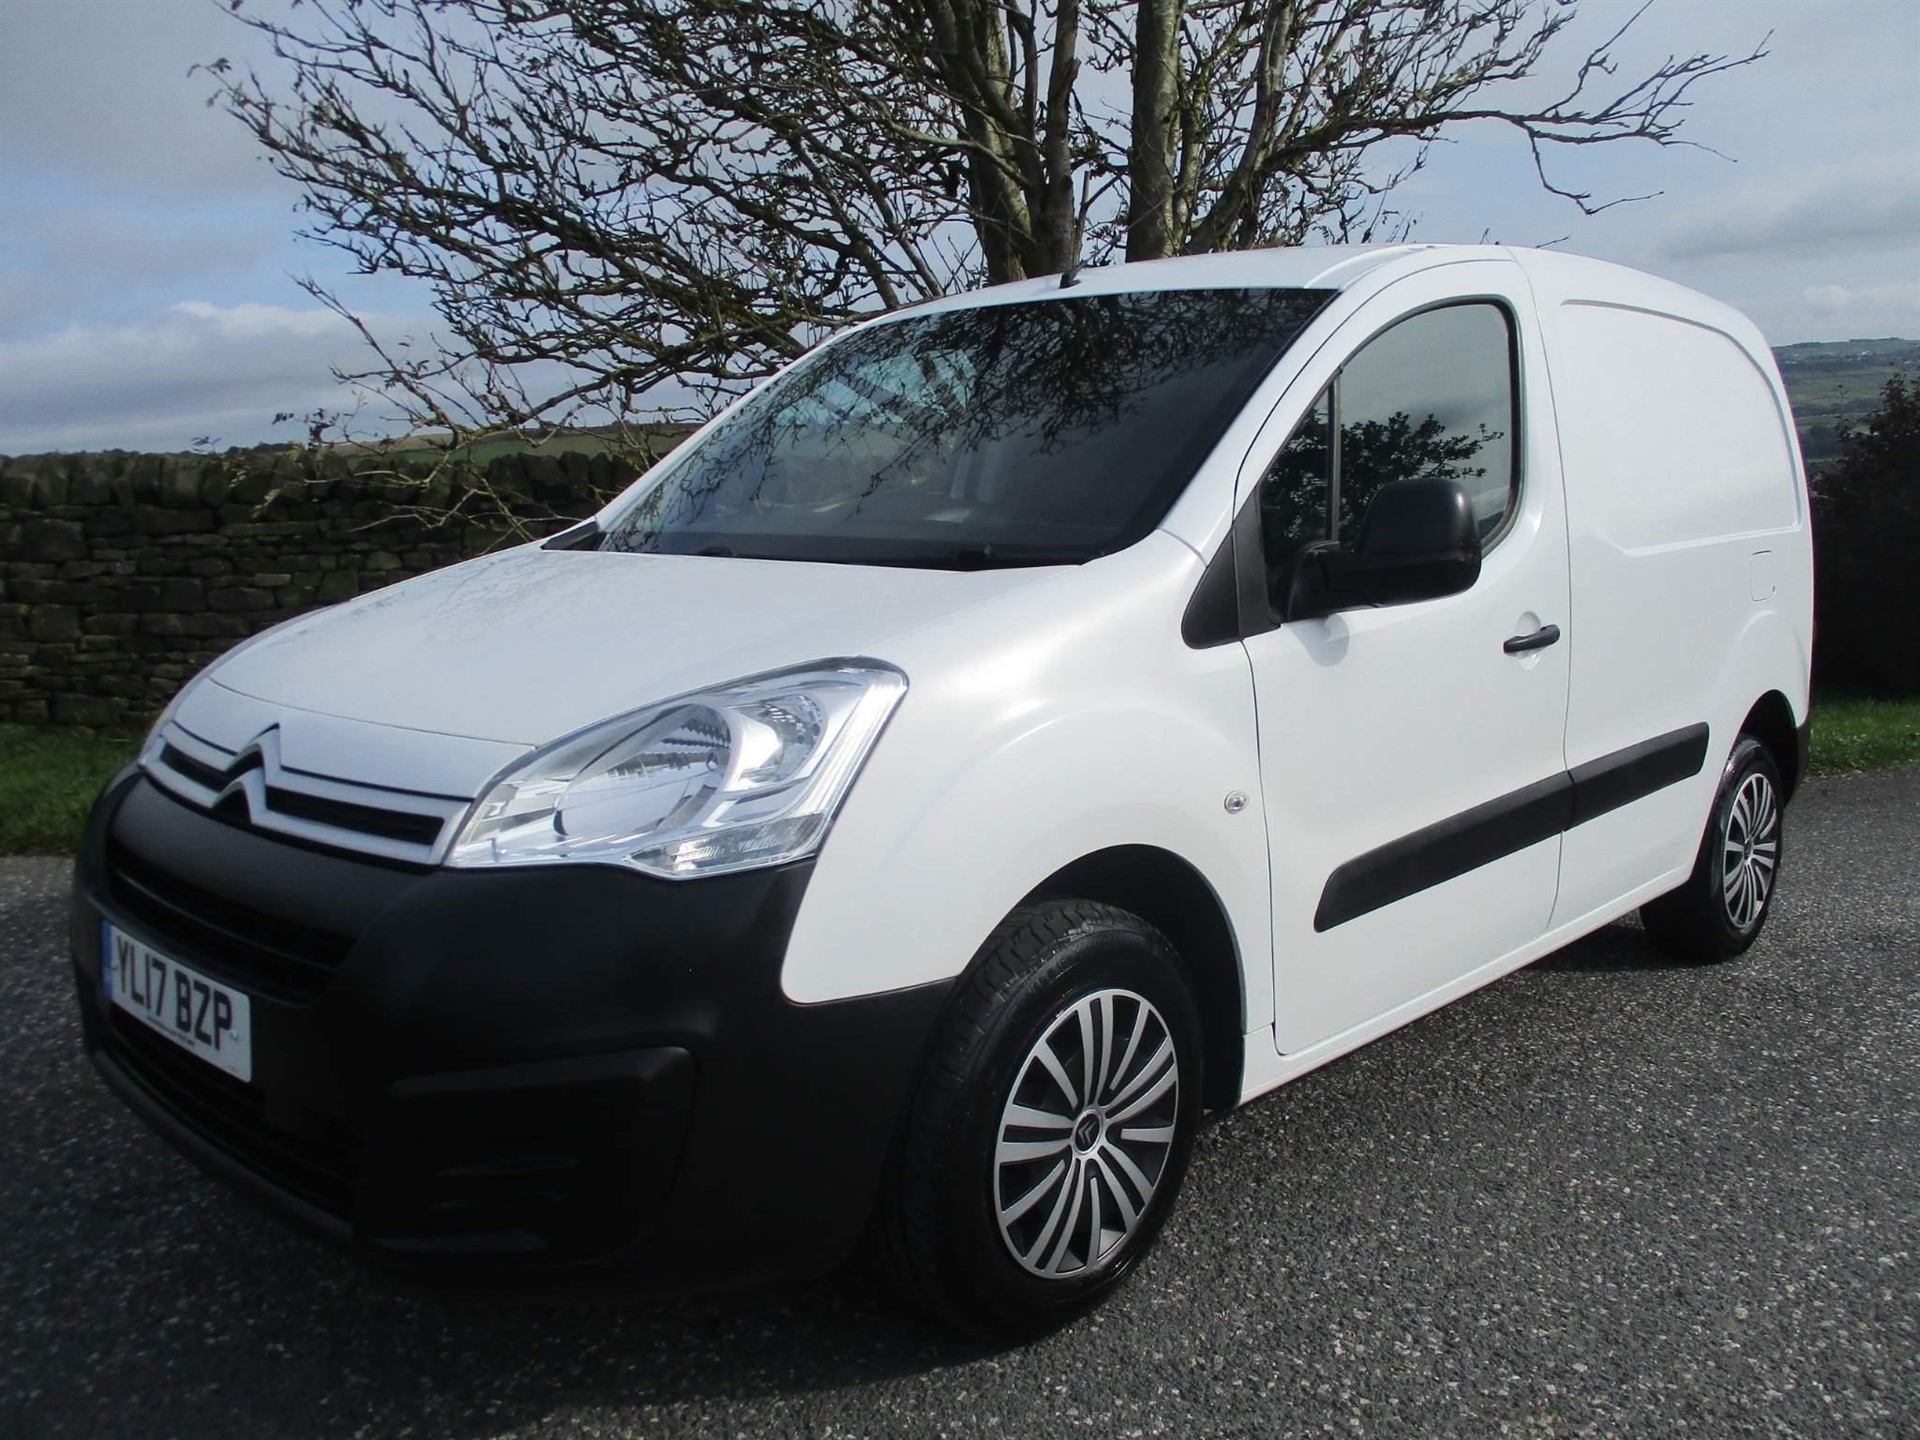 Used Citroen Berlingo for sale in Keighley, West Yorkshire